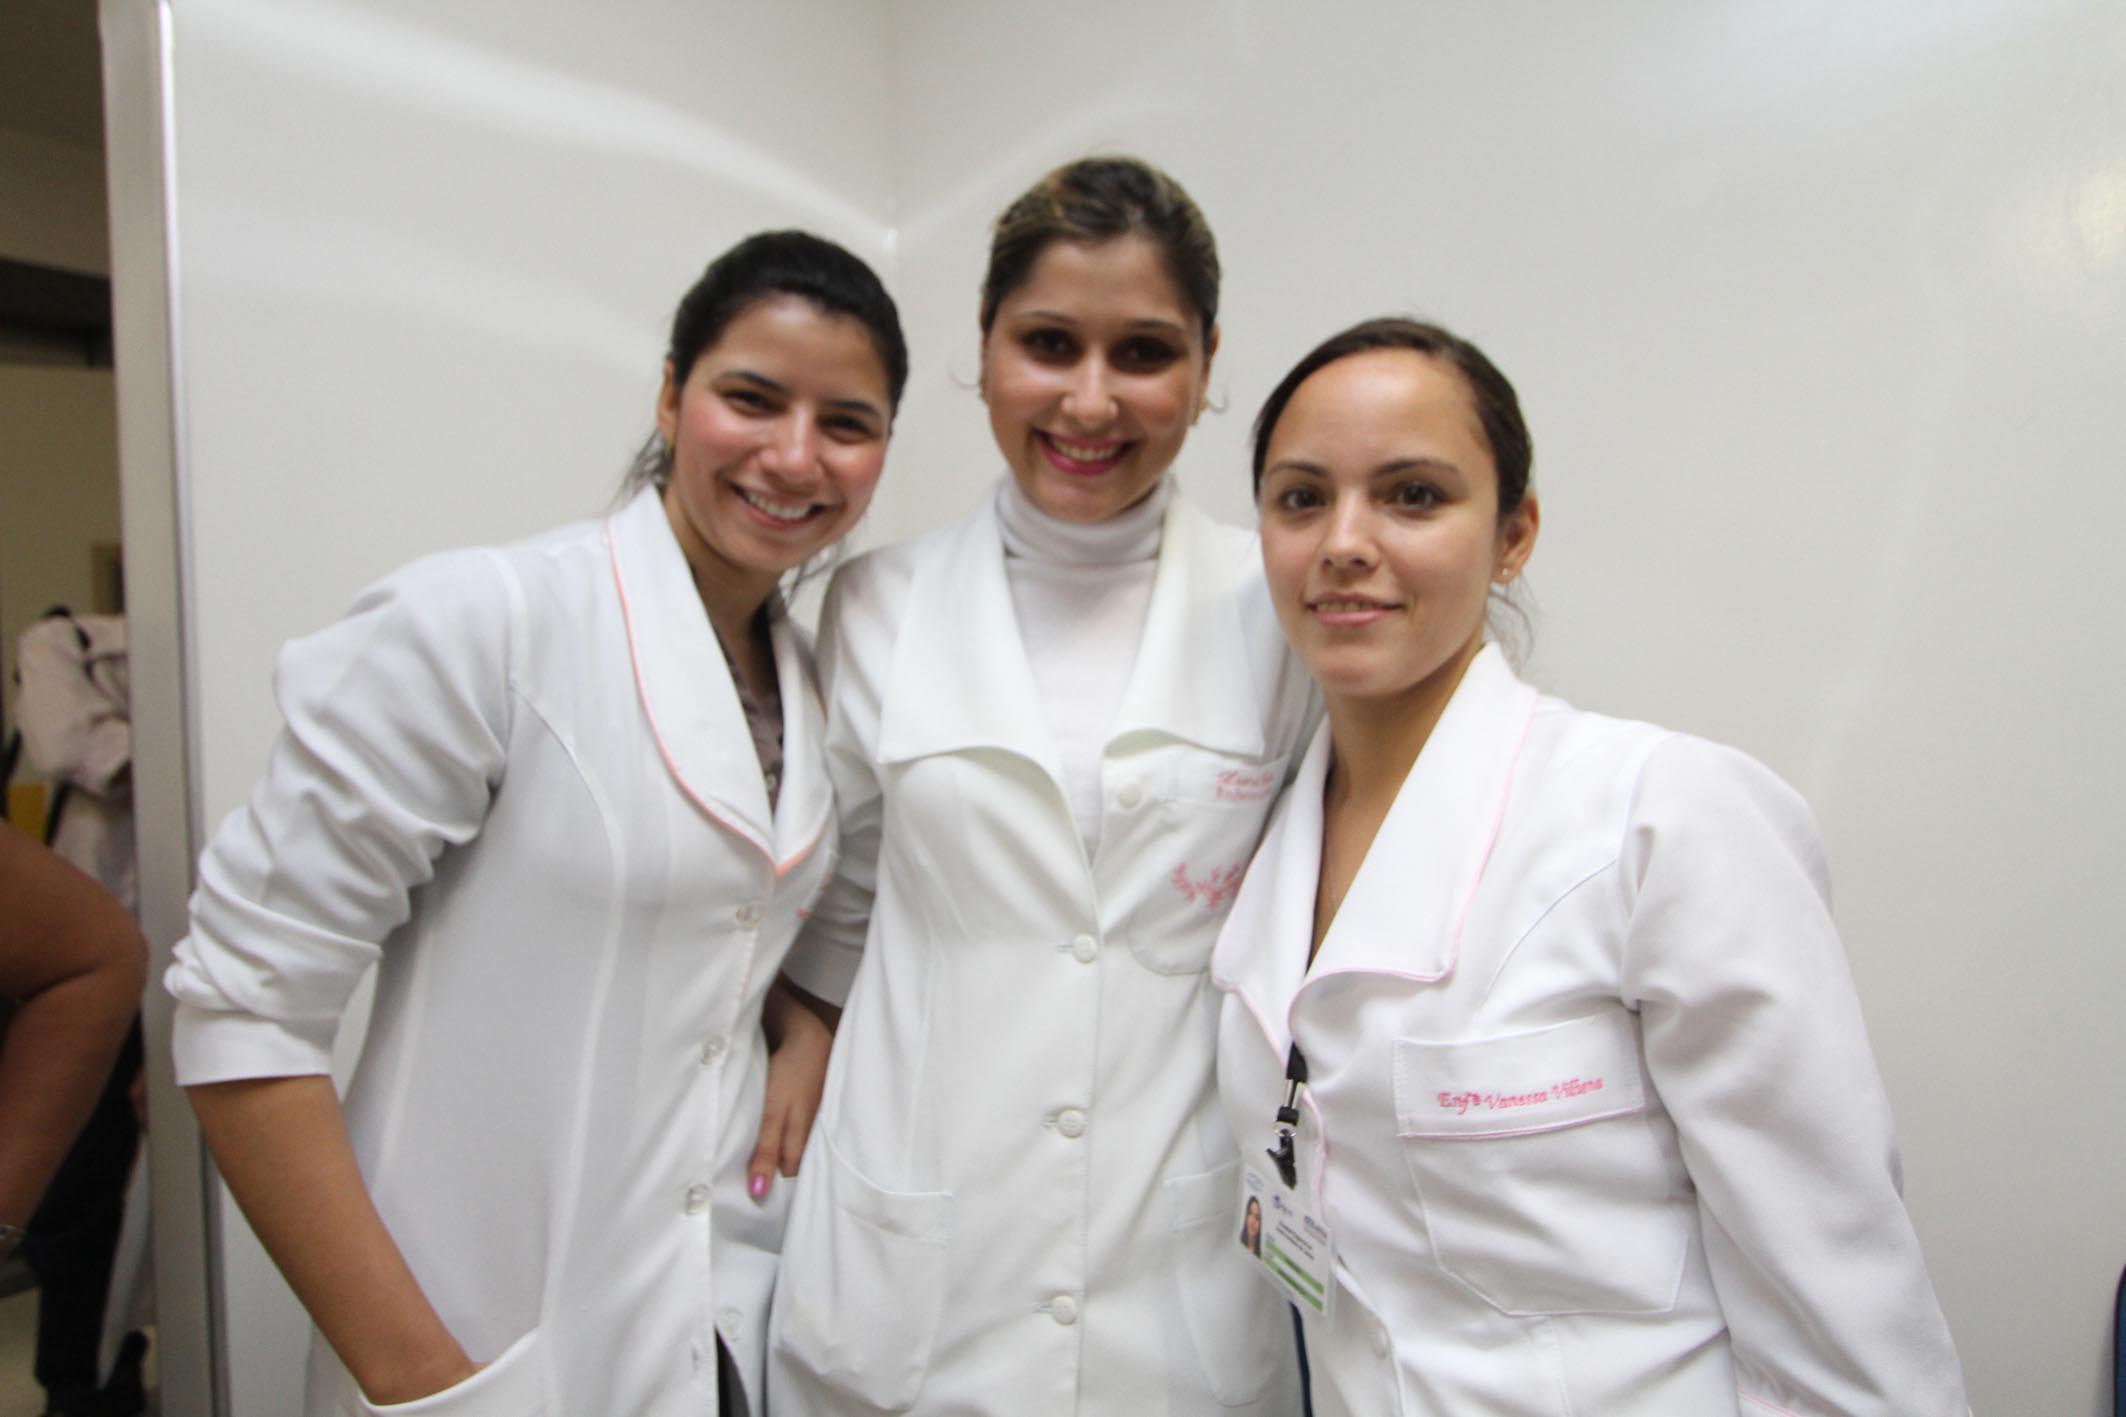 four people wearing white coats smile for the camera